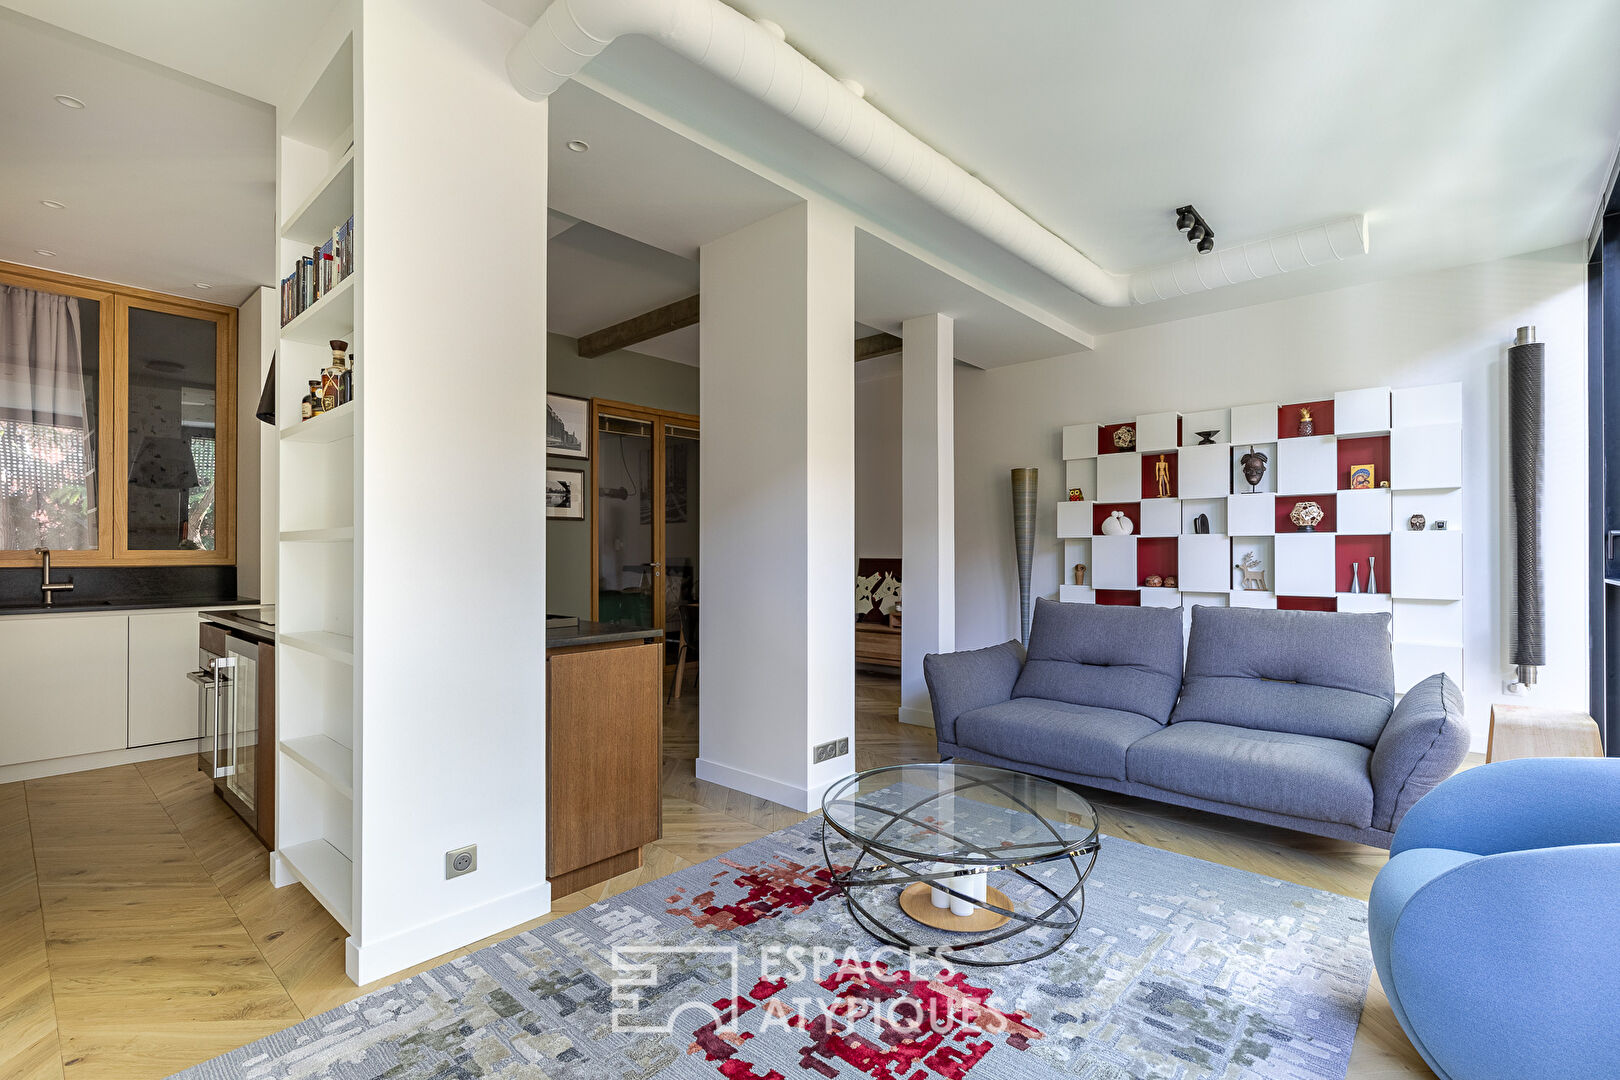 Architect’s apartment in the heart of the Village des Peupliers